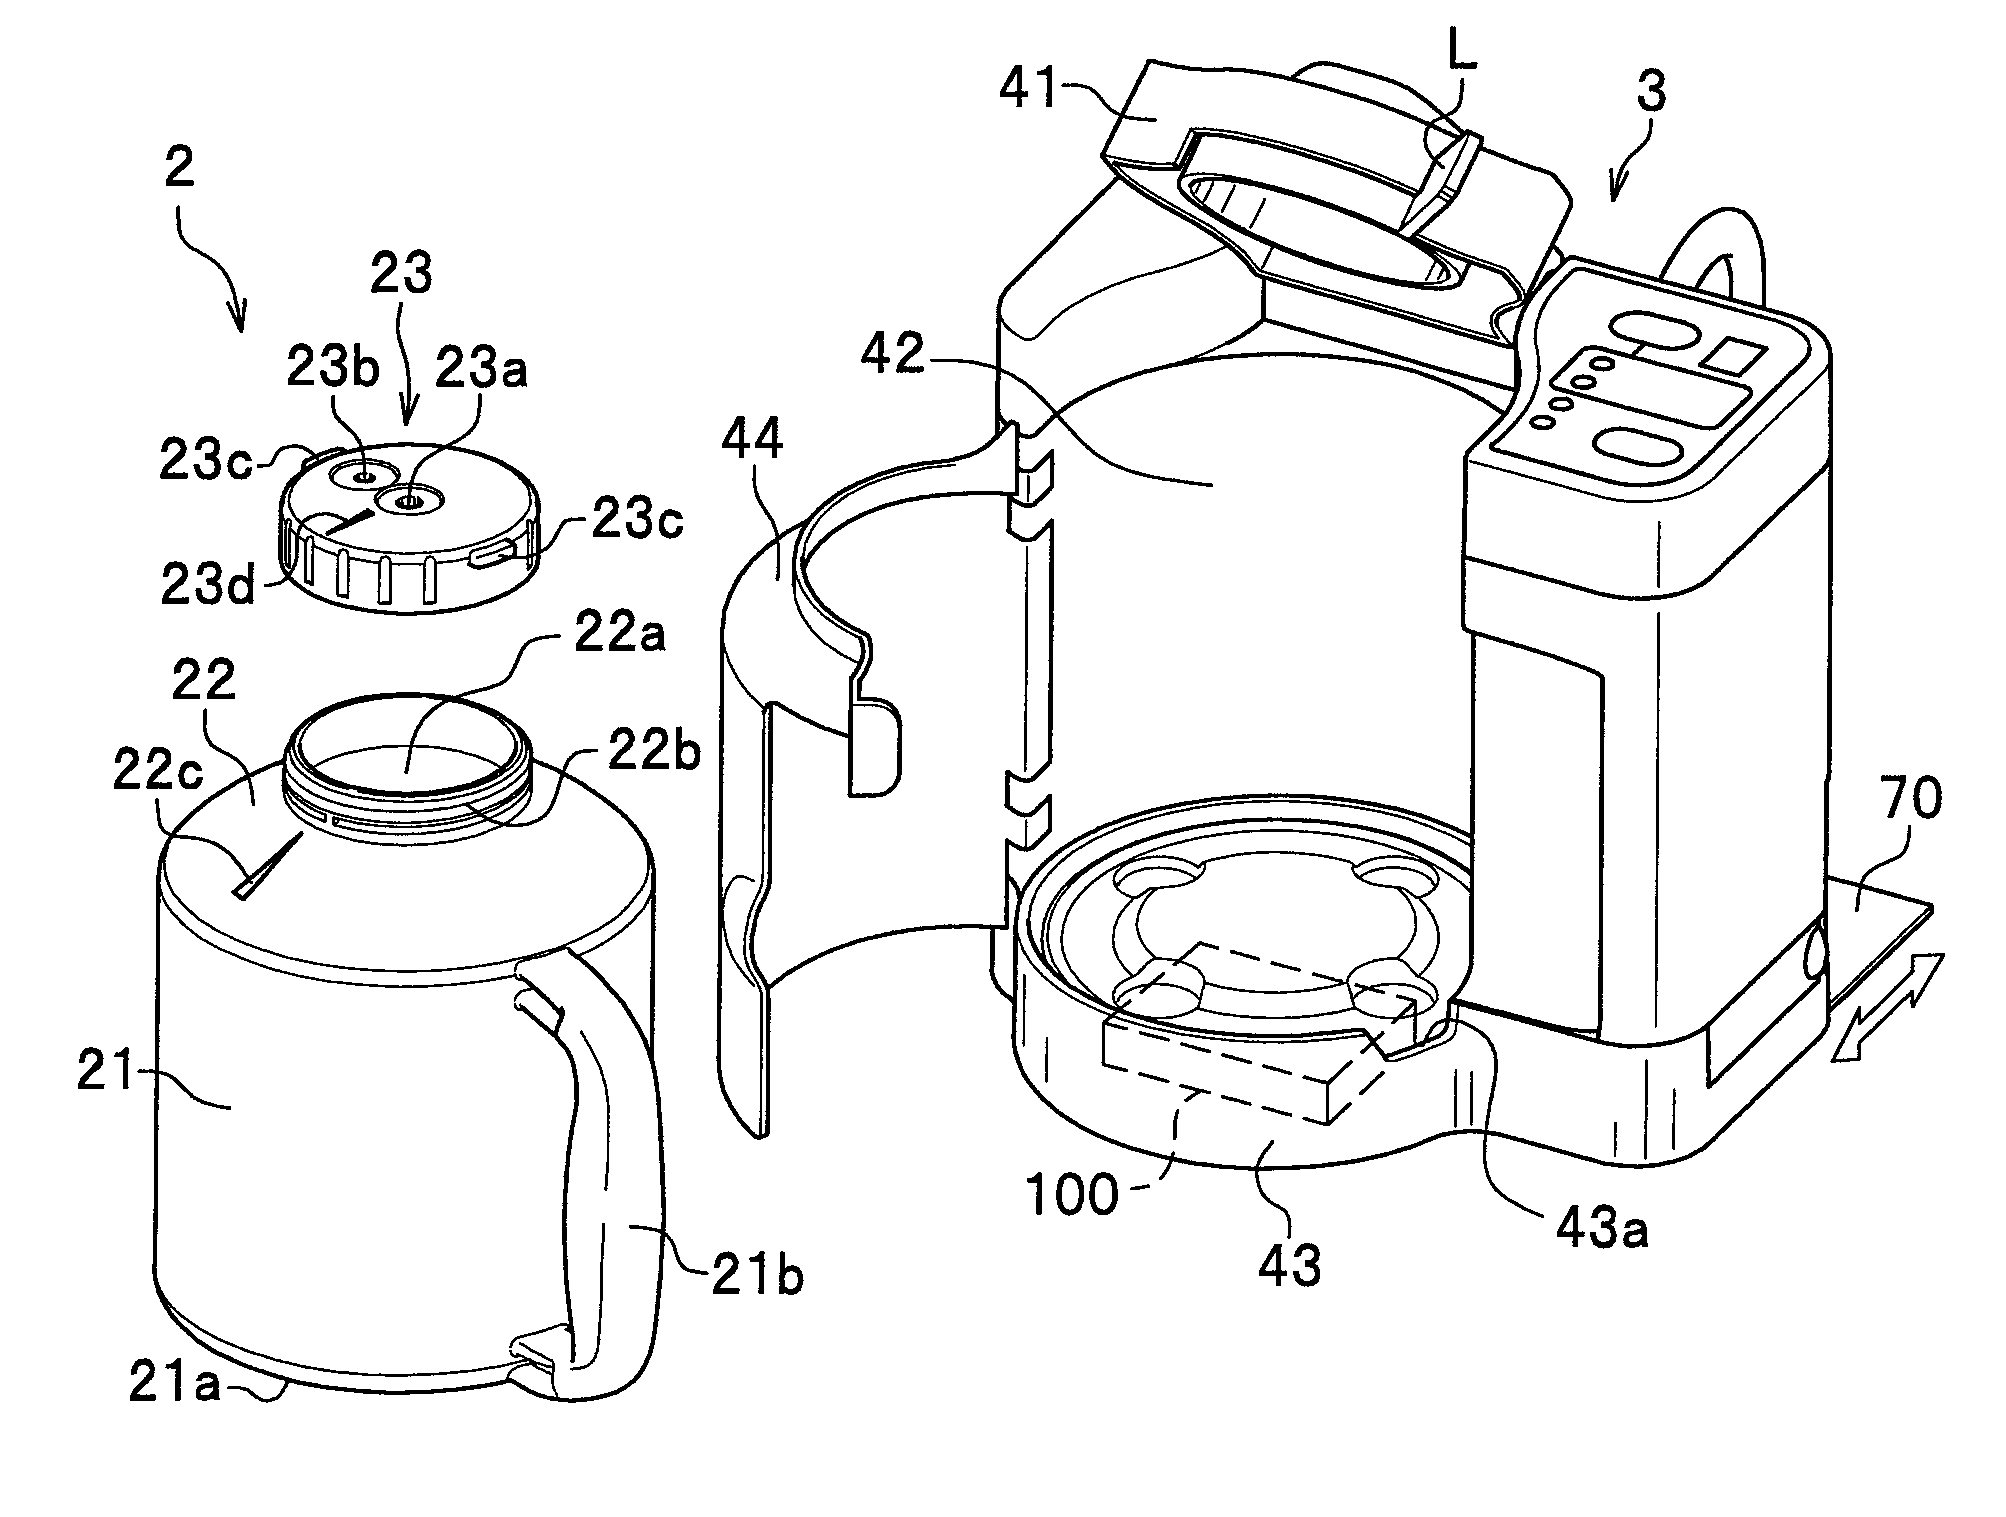 Automatic urine collection apparatus